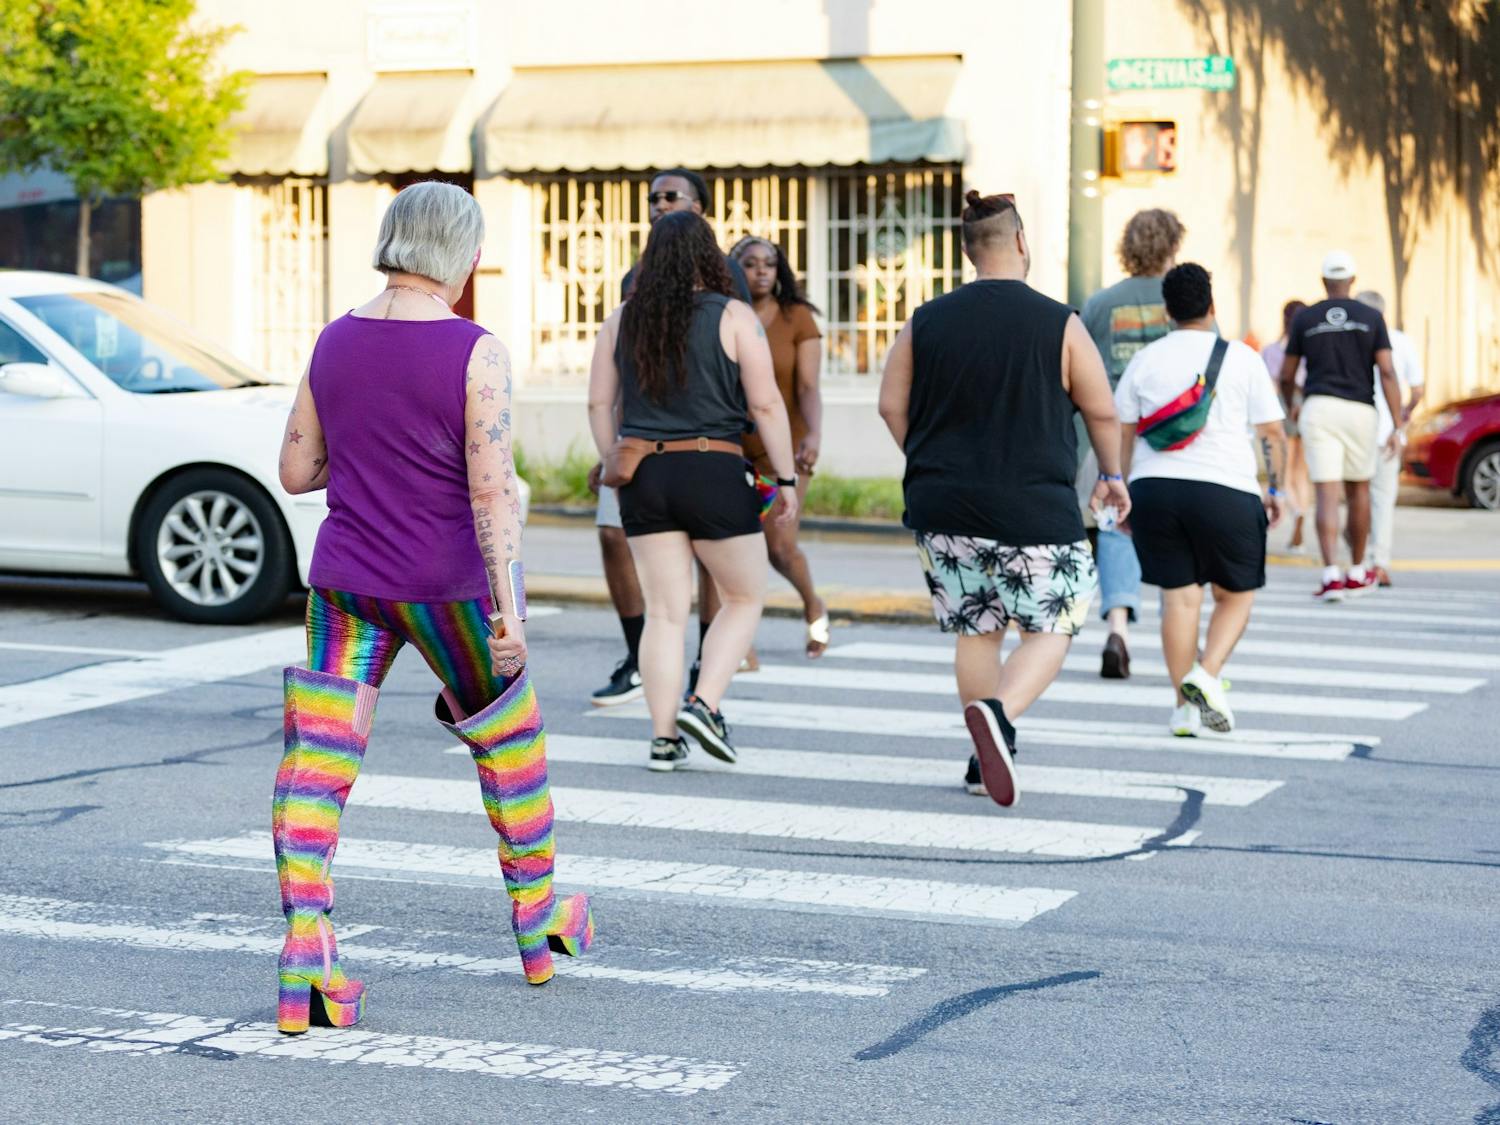 An Outfest attendee leaves the venue on Park Street on June 4, 2022. Outfest featured performances, food and vendors in honor of Pride month.